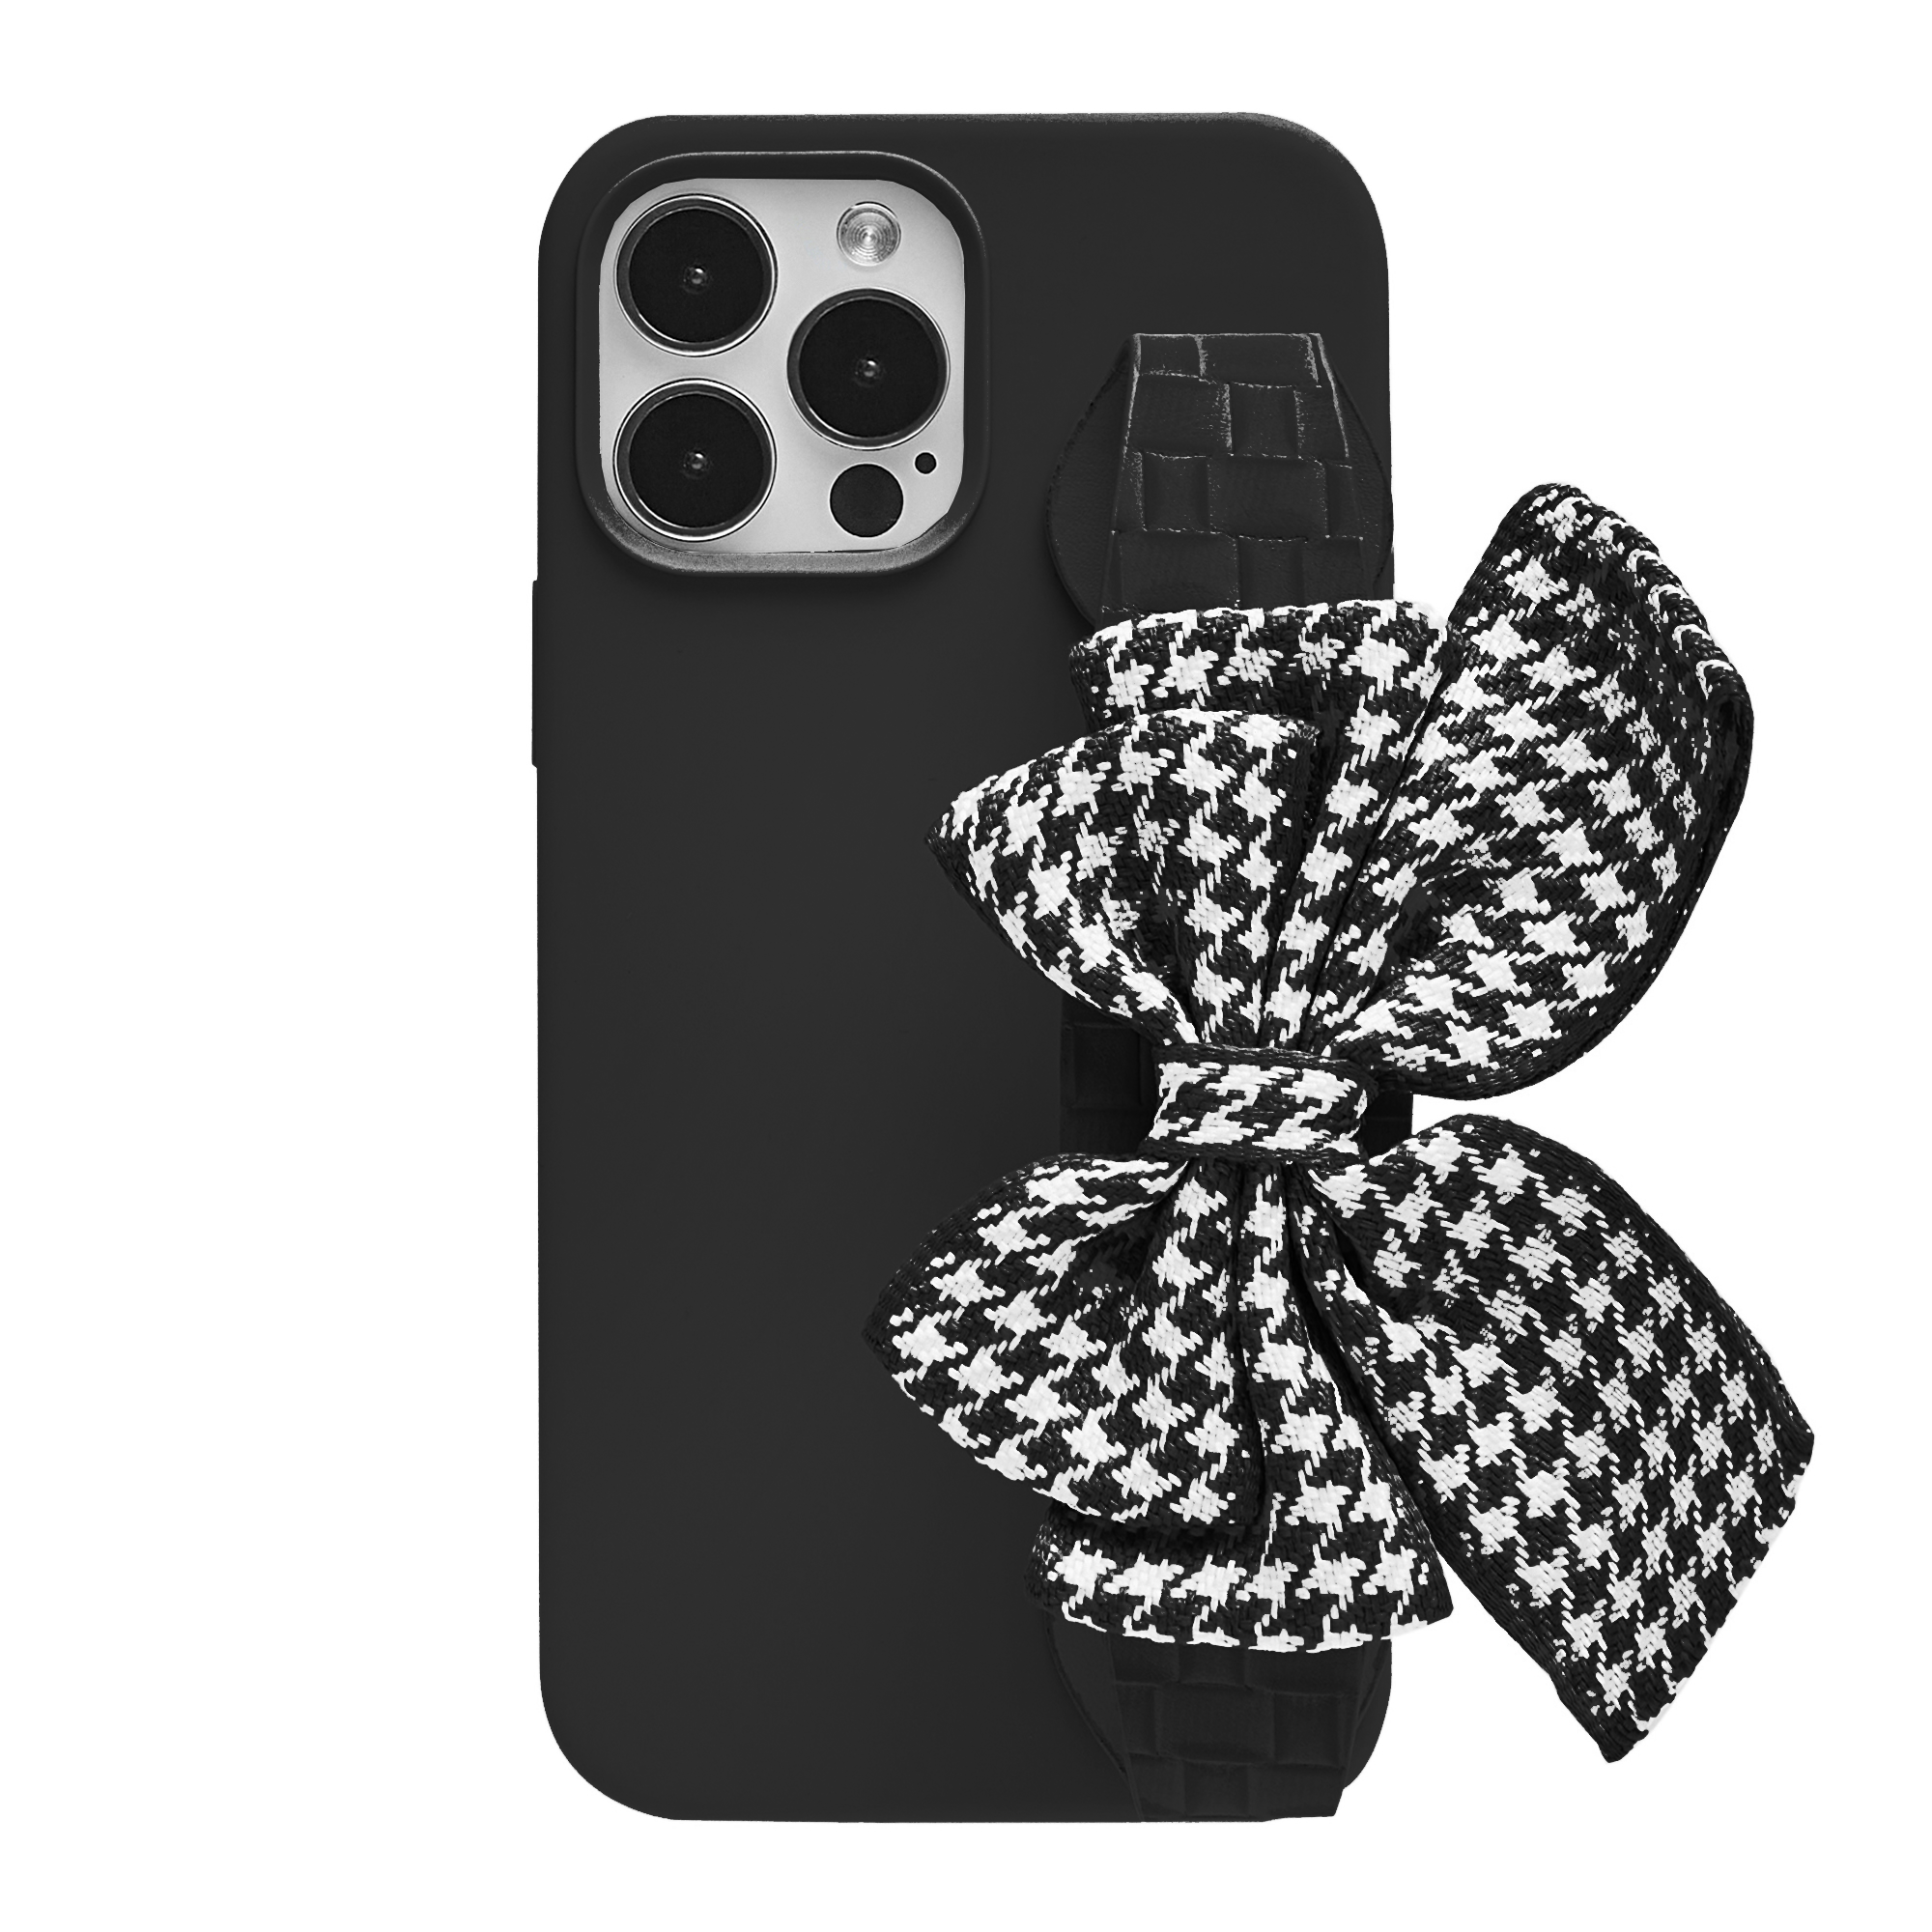 Houndstooth Bowknot Phone Case